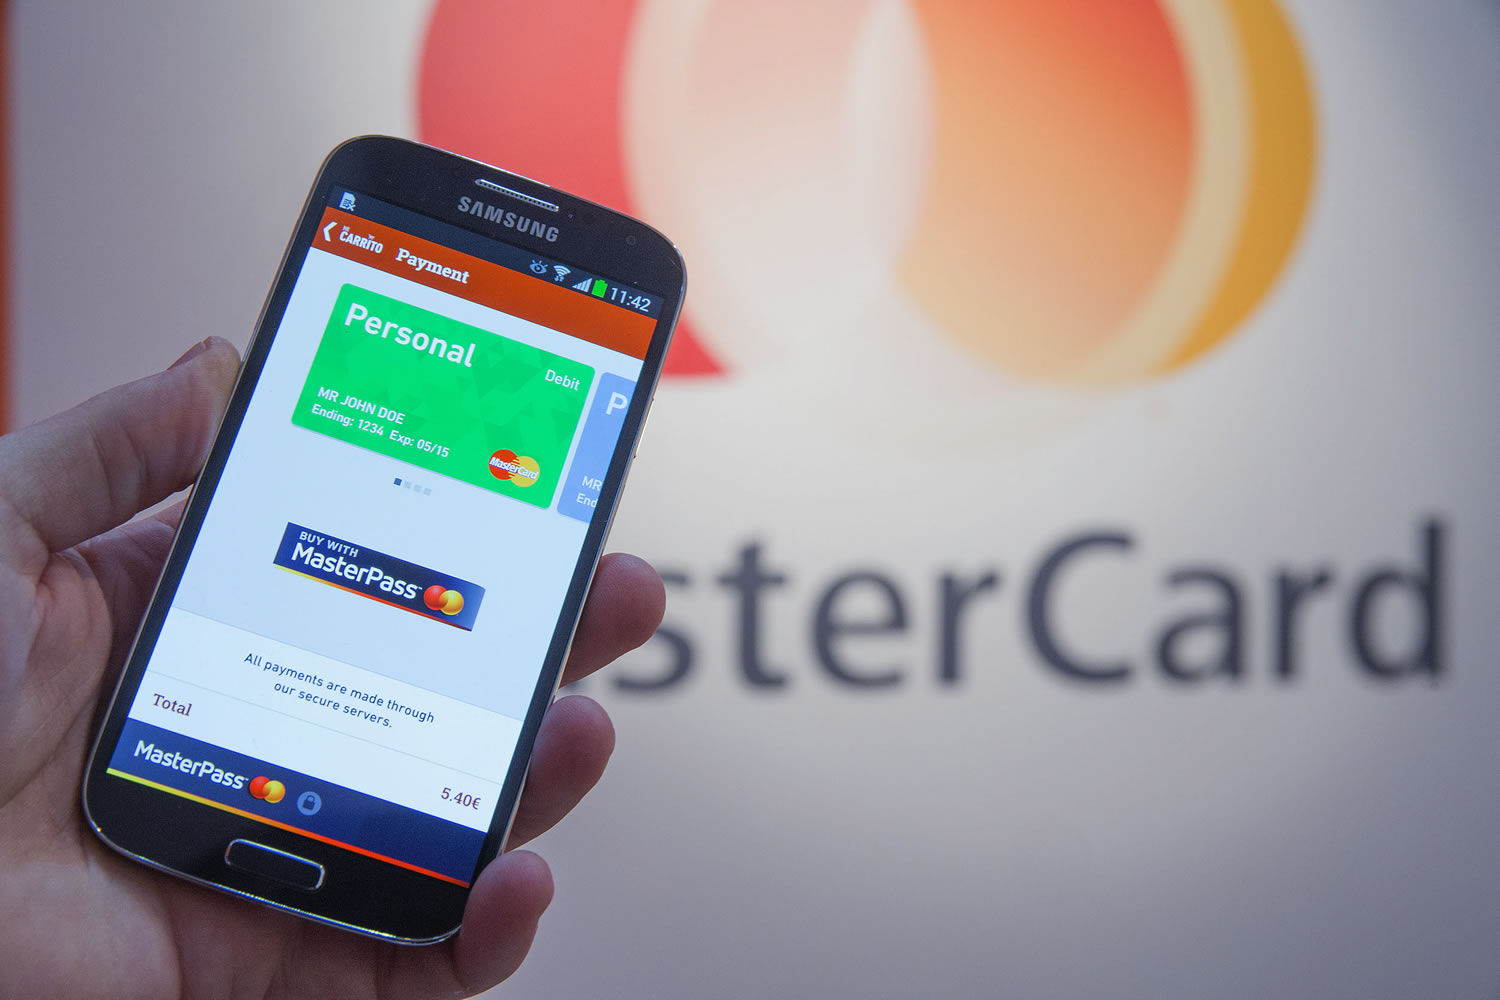 MasterCard
MasterCard launches MasterPass mobile app payments at the Mobile World Congress on  Feb. 24 in Barcelona, Spain.